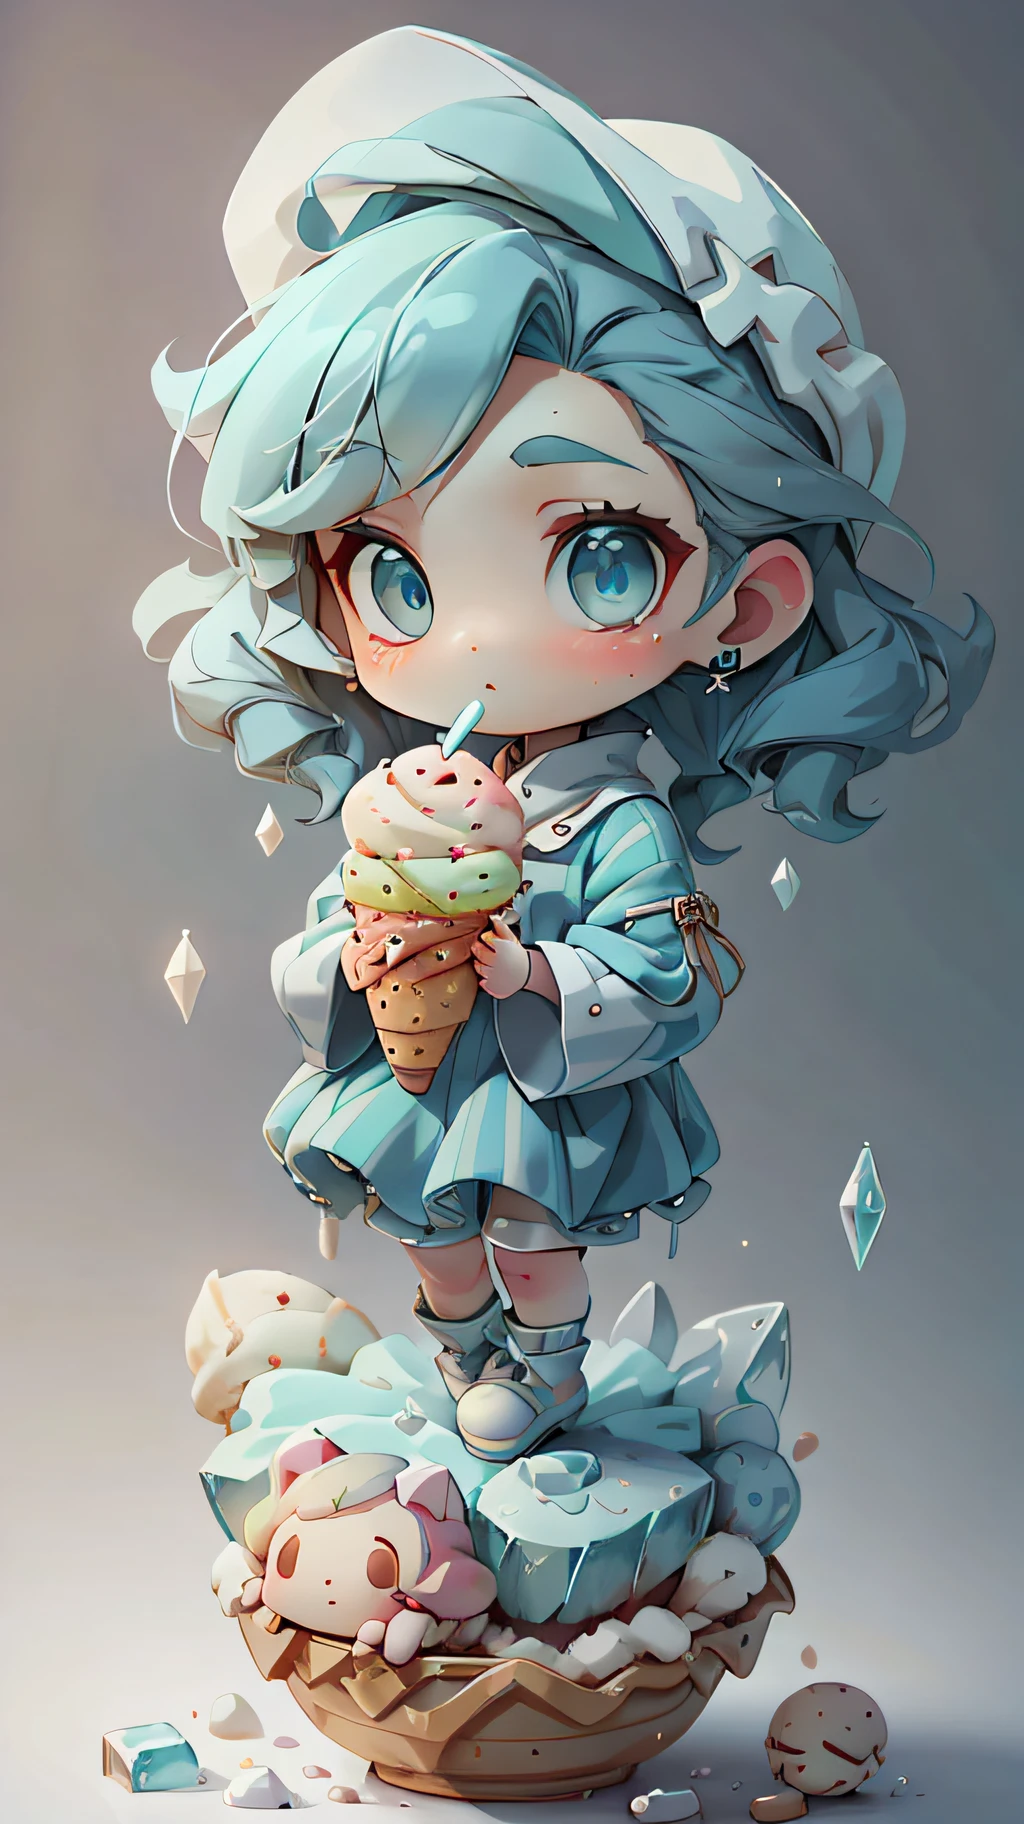 plastican00d， 1girls， Chibi T-Shi， Blue hair， Luxury fabrics， dithering， Ice cream texture，Profound， looks at the viewer， Striped background